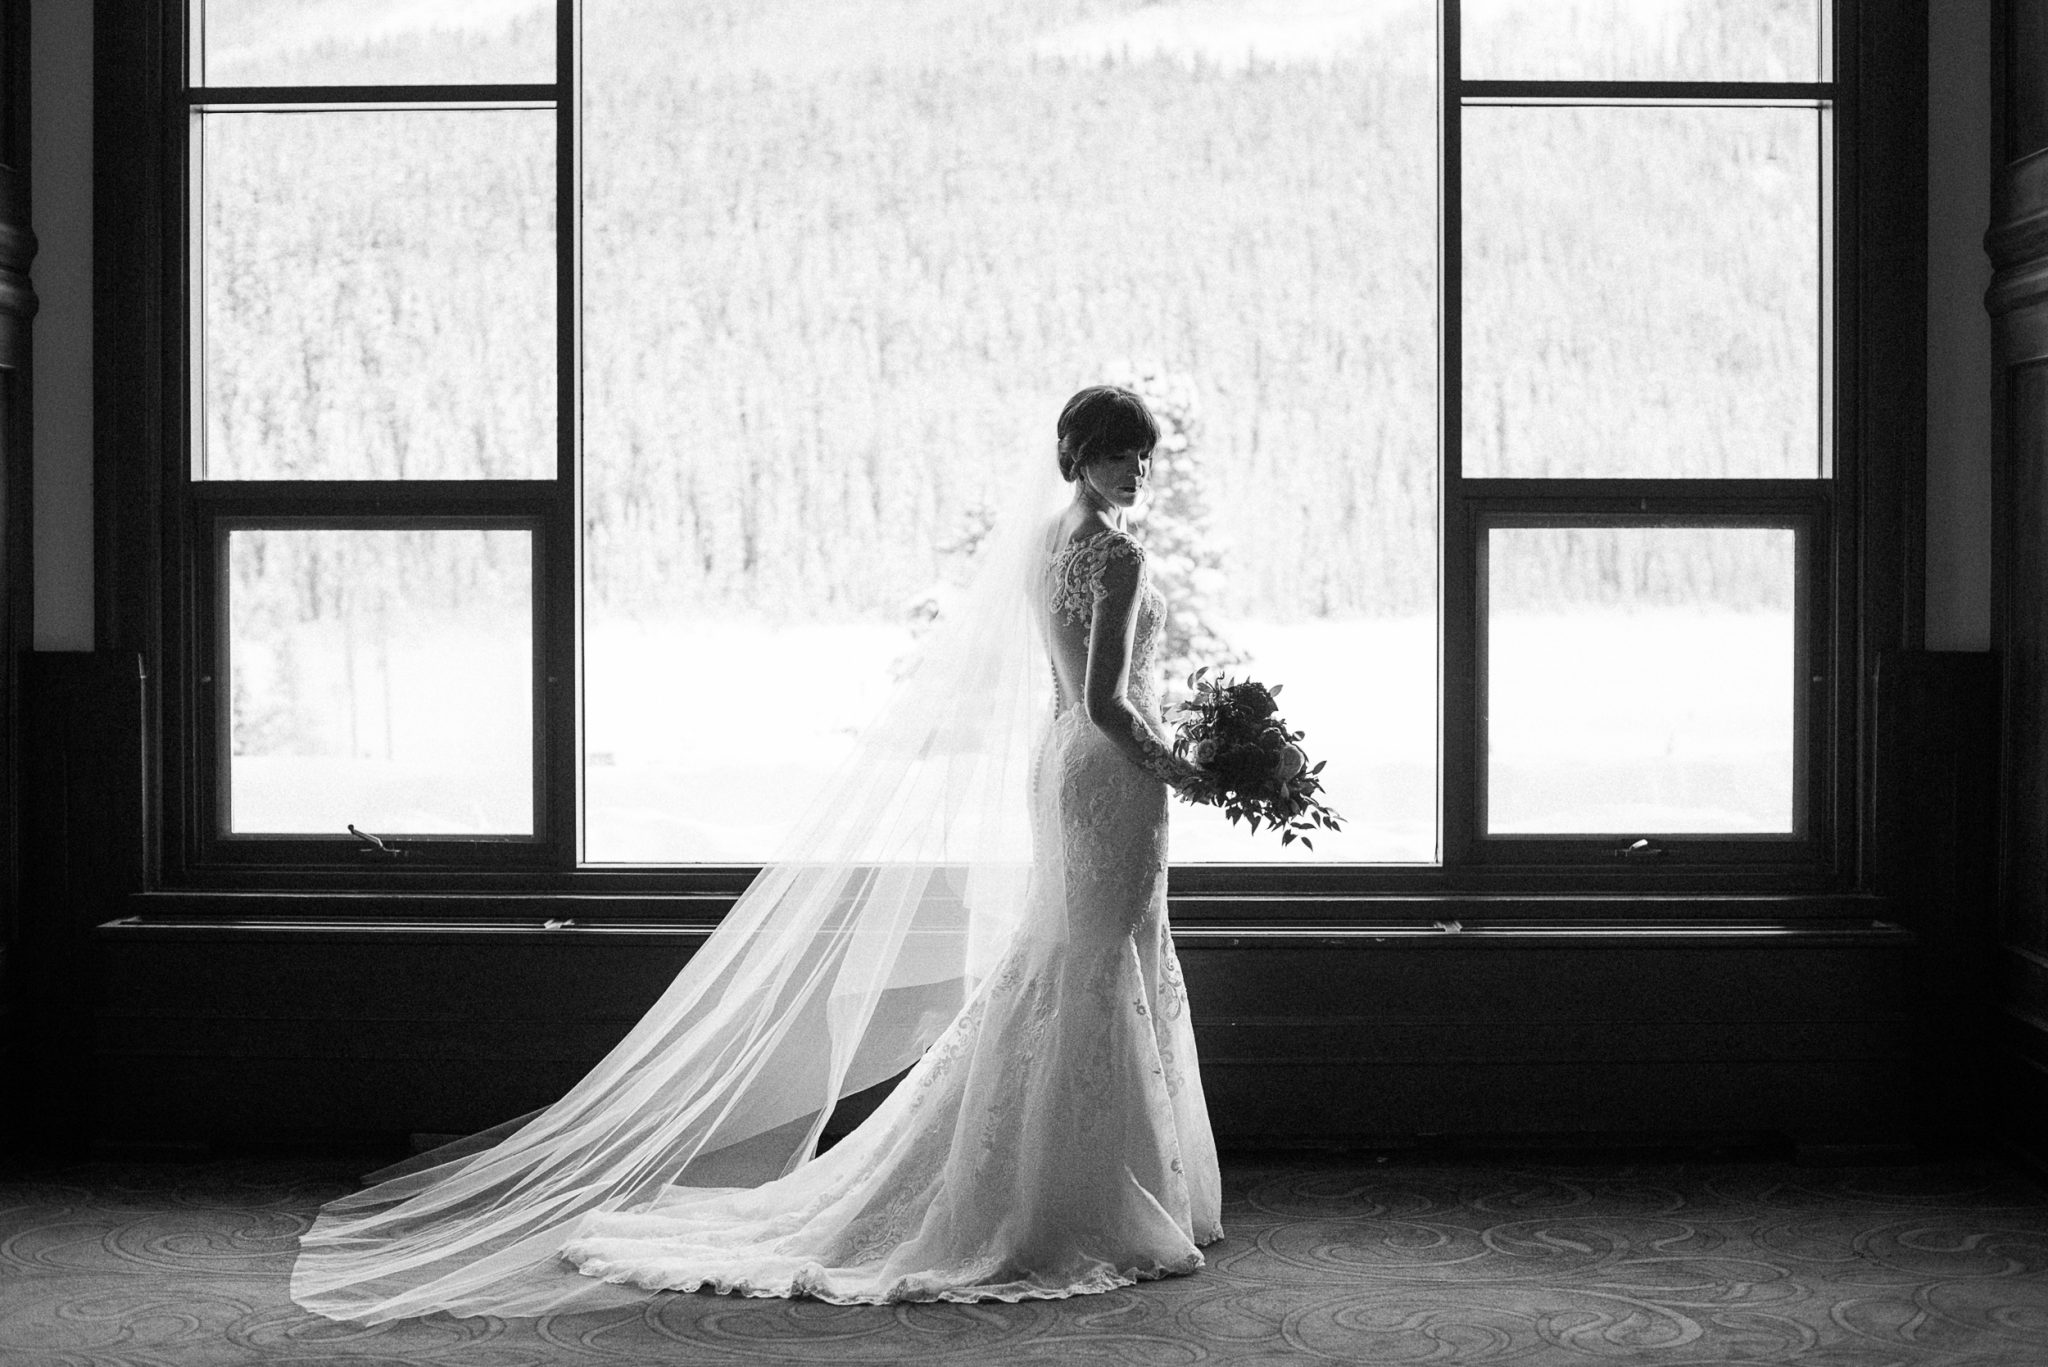 Be My Valentine: A Romantic Valentine's Day Wedding at Chateau Lake Louise - featured on the Bronte Bride Blog